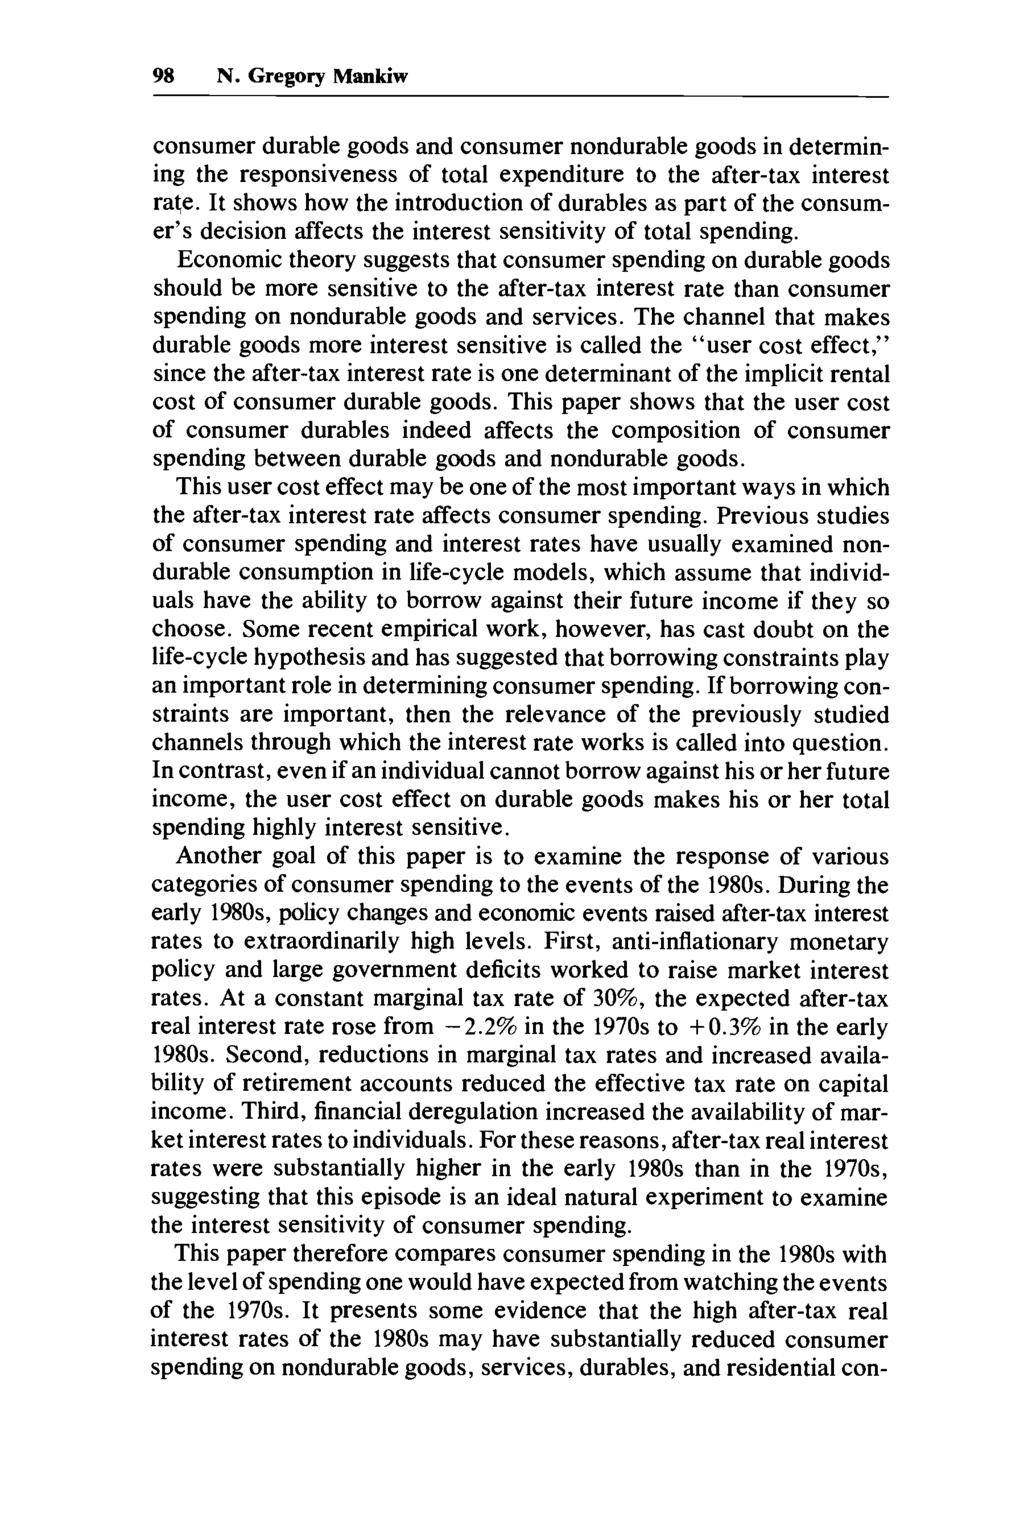 98 N. Gregory Mankiw consumer durable goods and consumer nondurable goods in determining the responsiveness of total expenditure to the after-tax interest raqe.